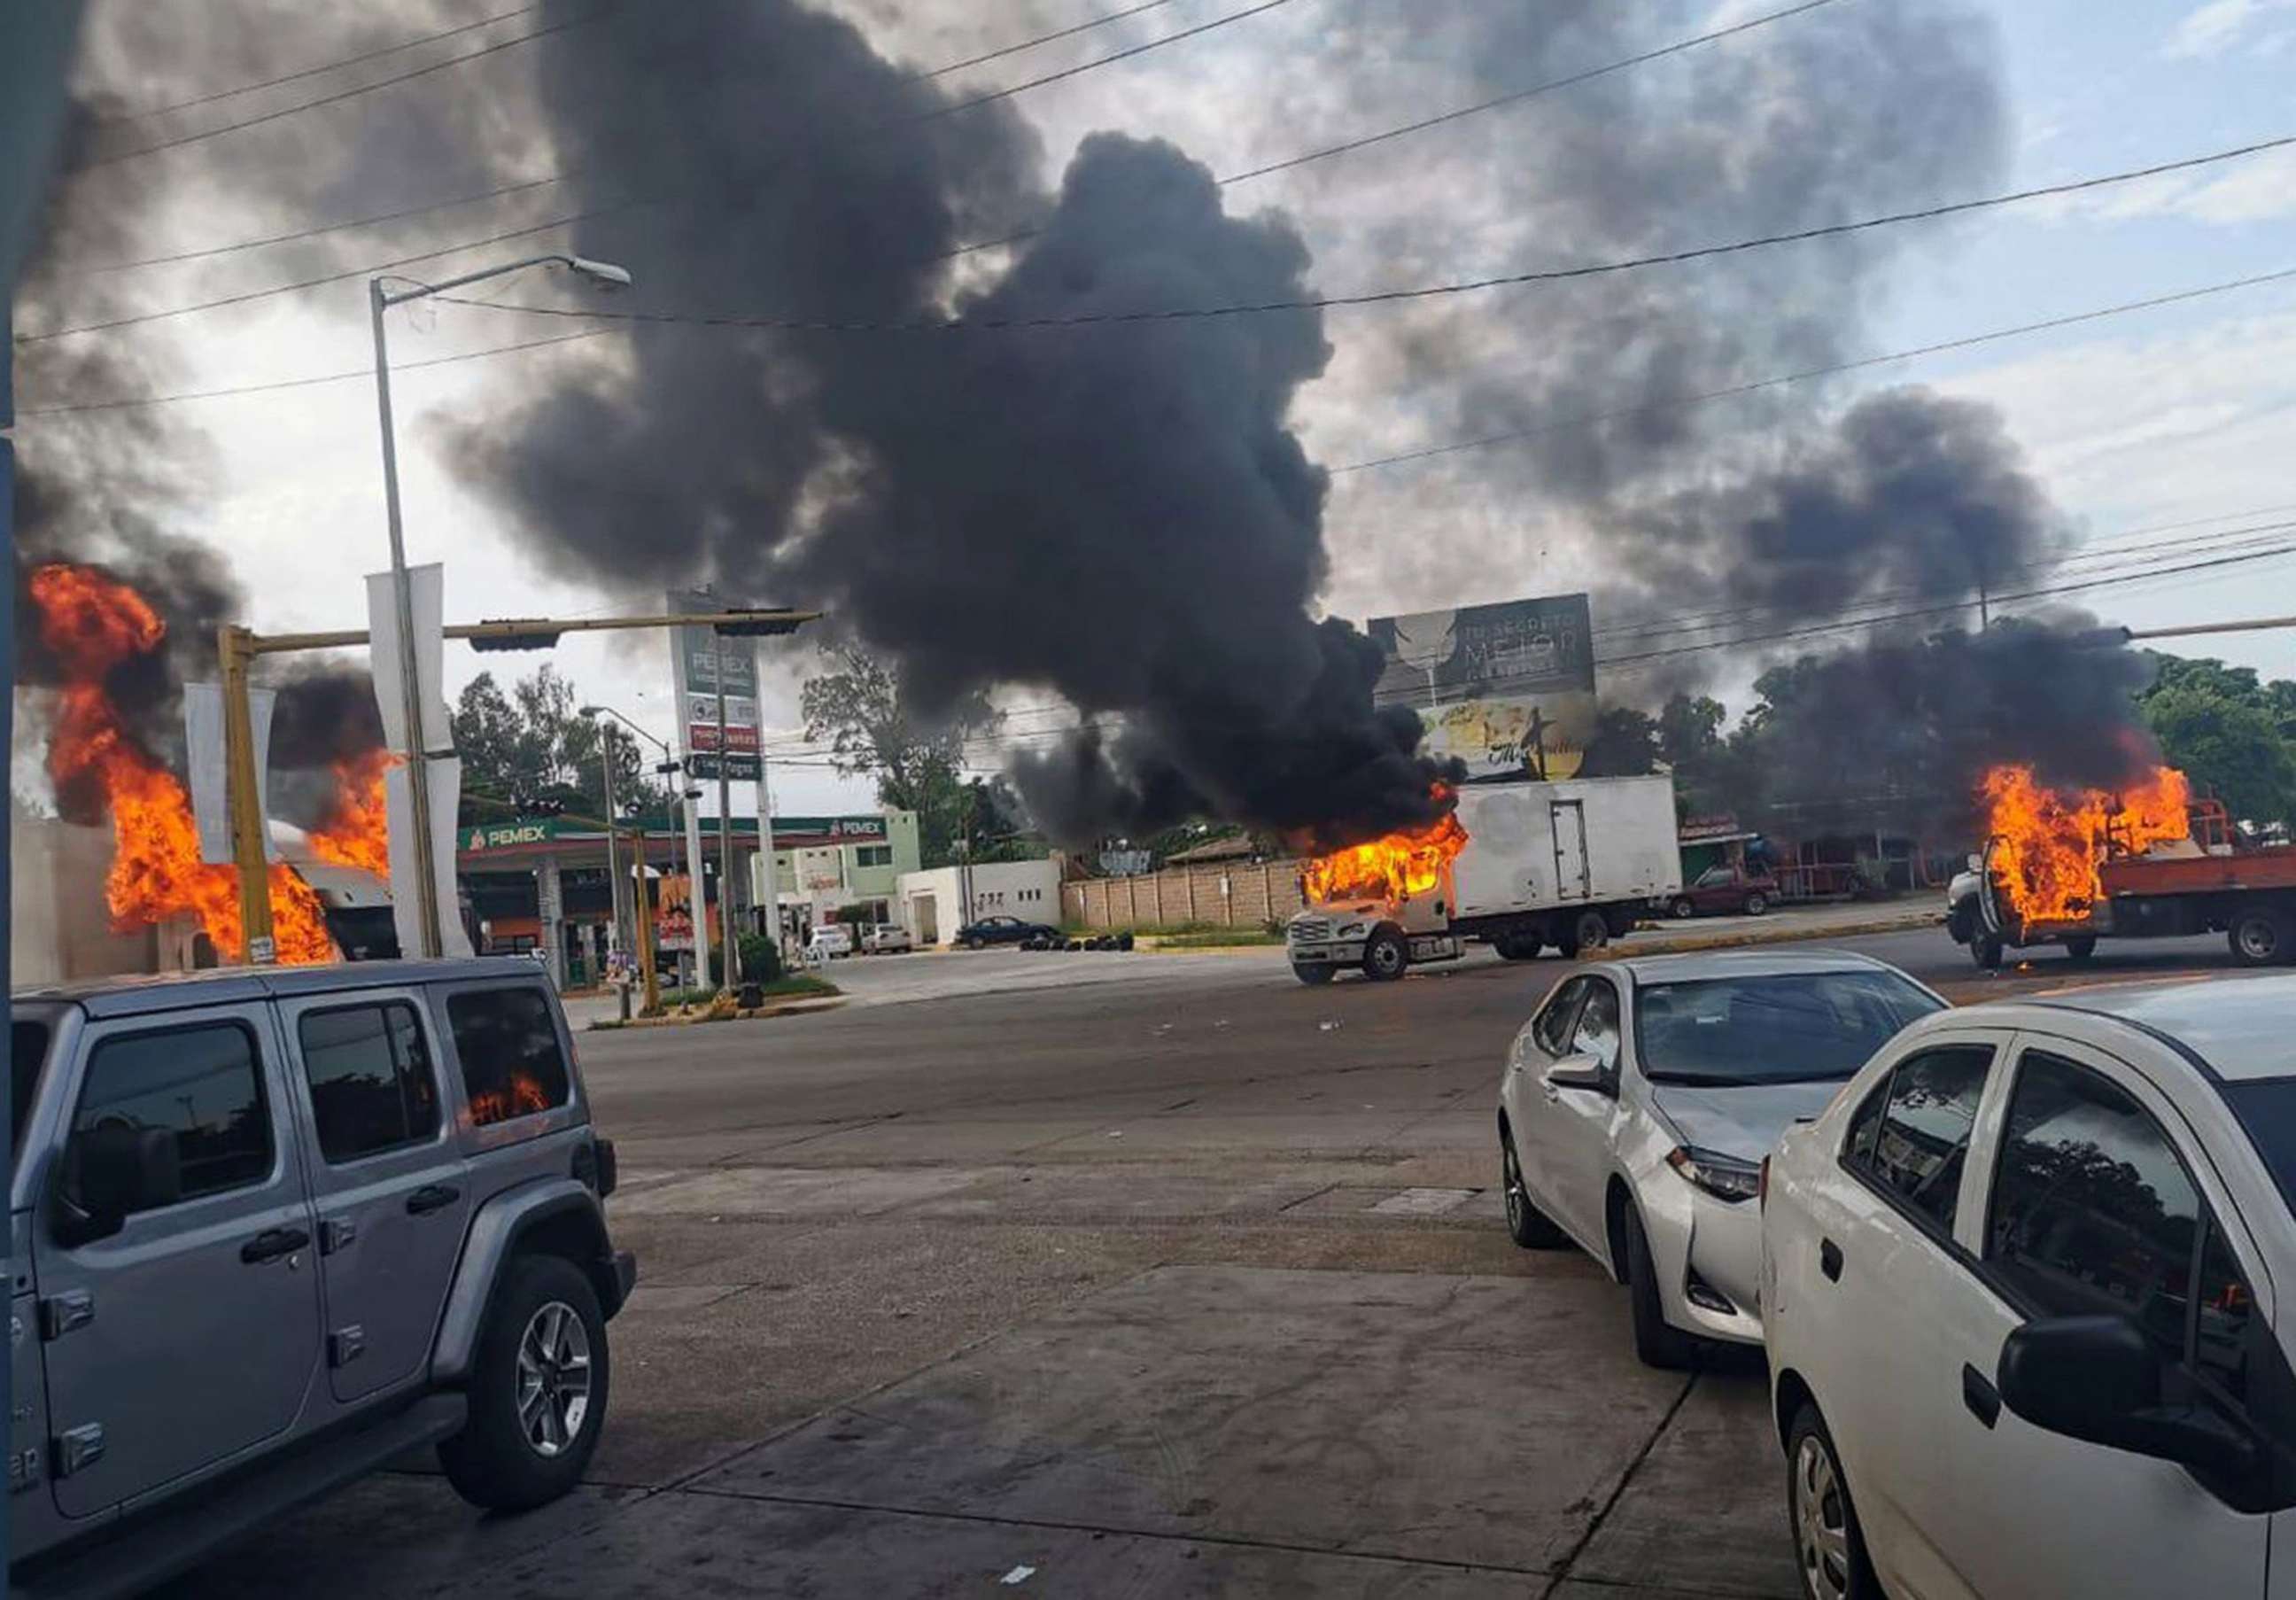 PHOTO: A view of vehicles on fire during a clash between armed gunmen and Federal police and military soldiers, in the streets of the city of Culiacan, Sinaloa state, Mexico, Oct. 17, 2019.